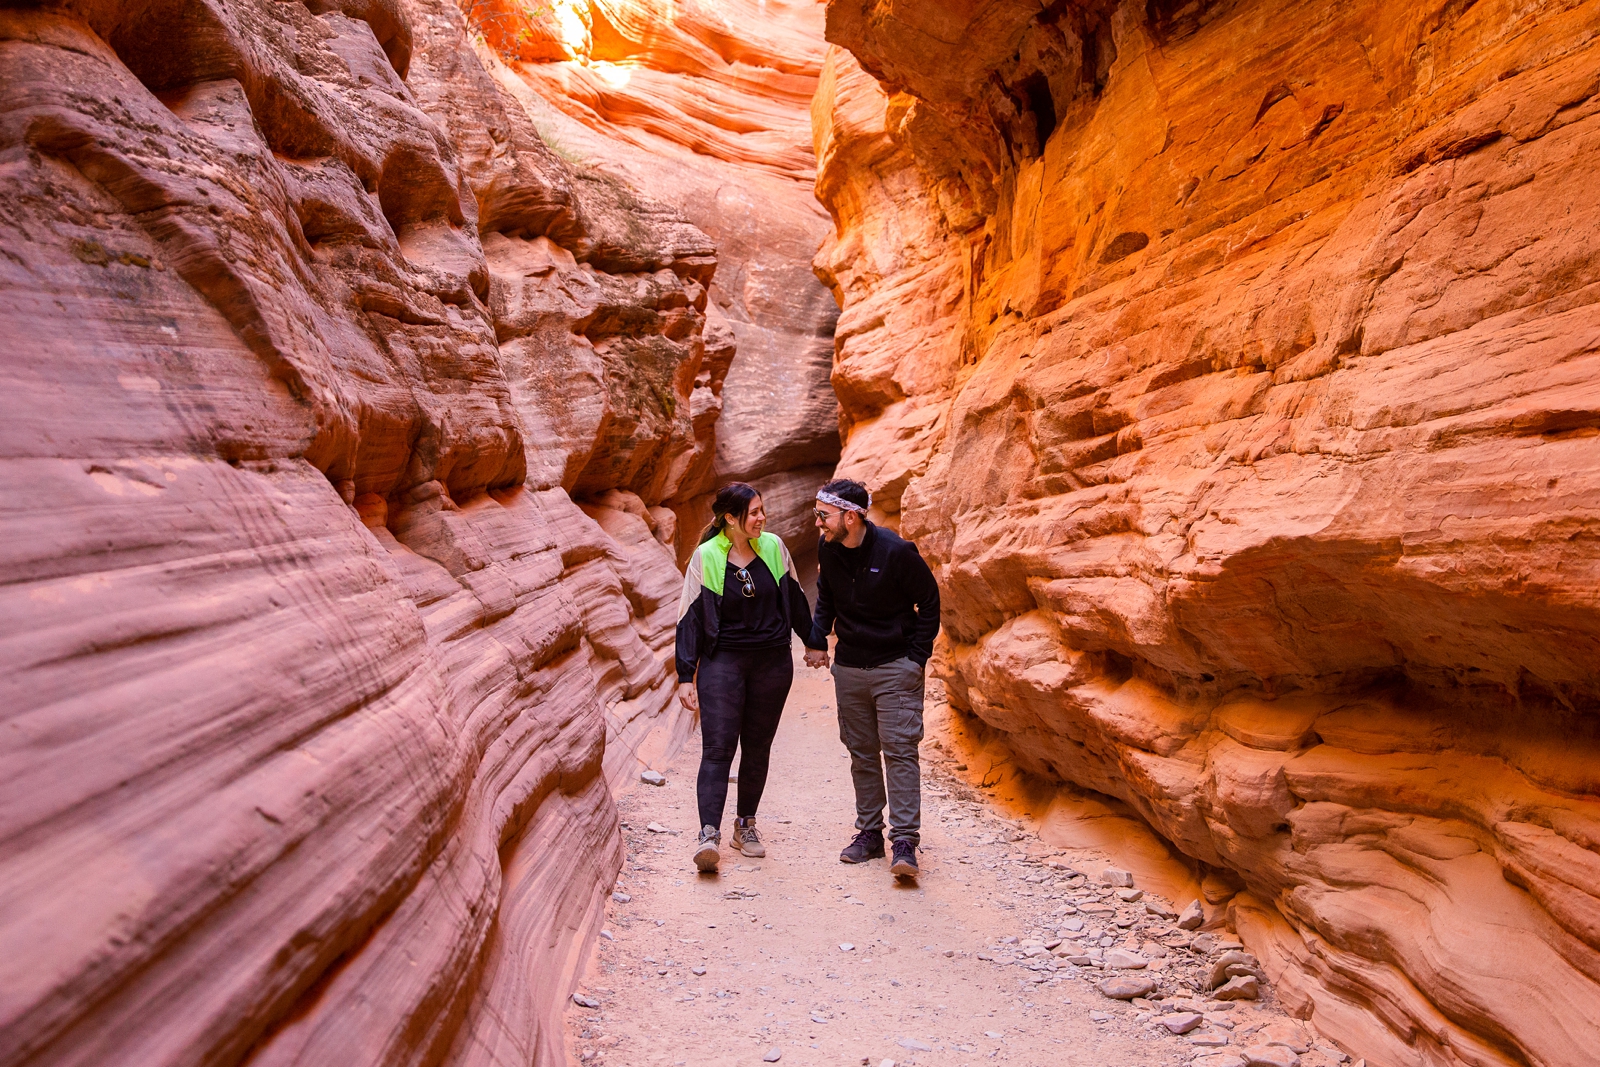 A newly engaged couple walking through the Utah slot canyon holding hands and laughing after their adventurous surprise proposal